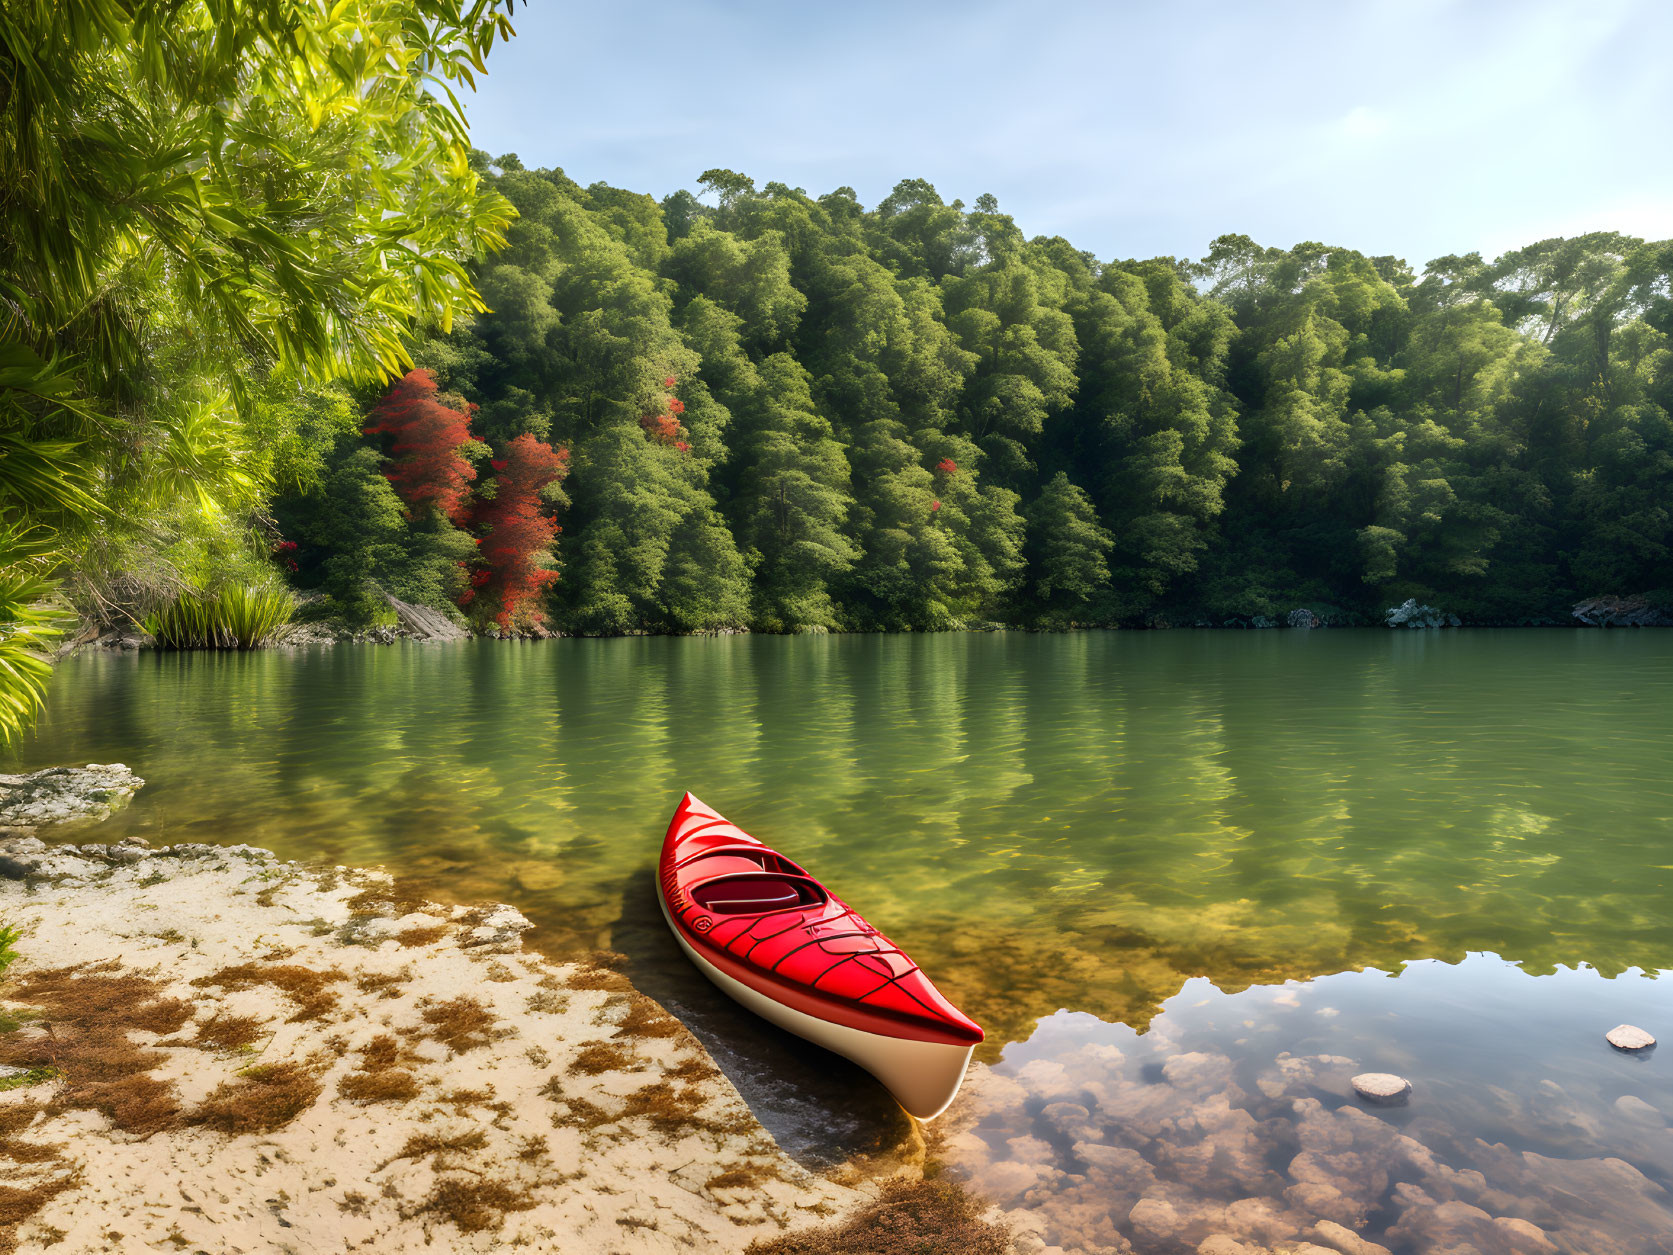 Red Kayak on Sandy Shore of Tranquil Tree-Lined Lake